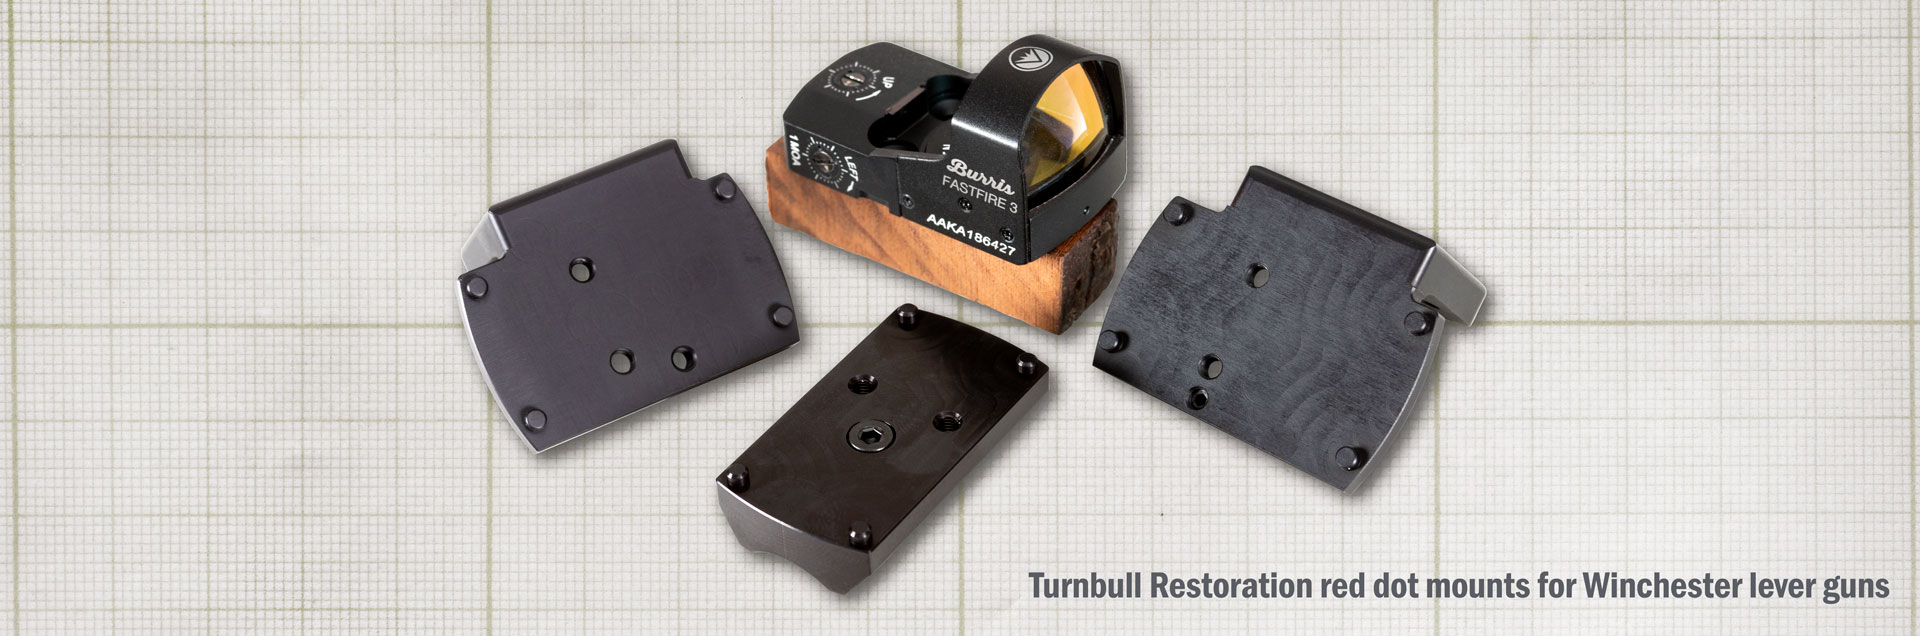 Red Dot sight mounts for Winchester lever action rifles made by Turnbull Restoration